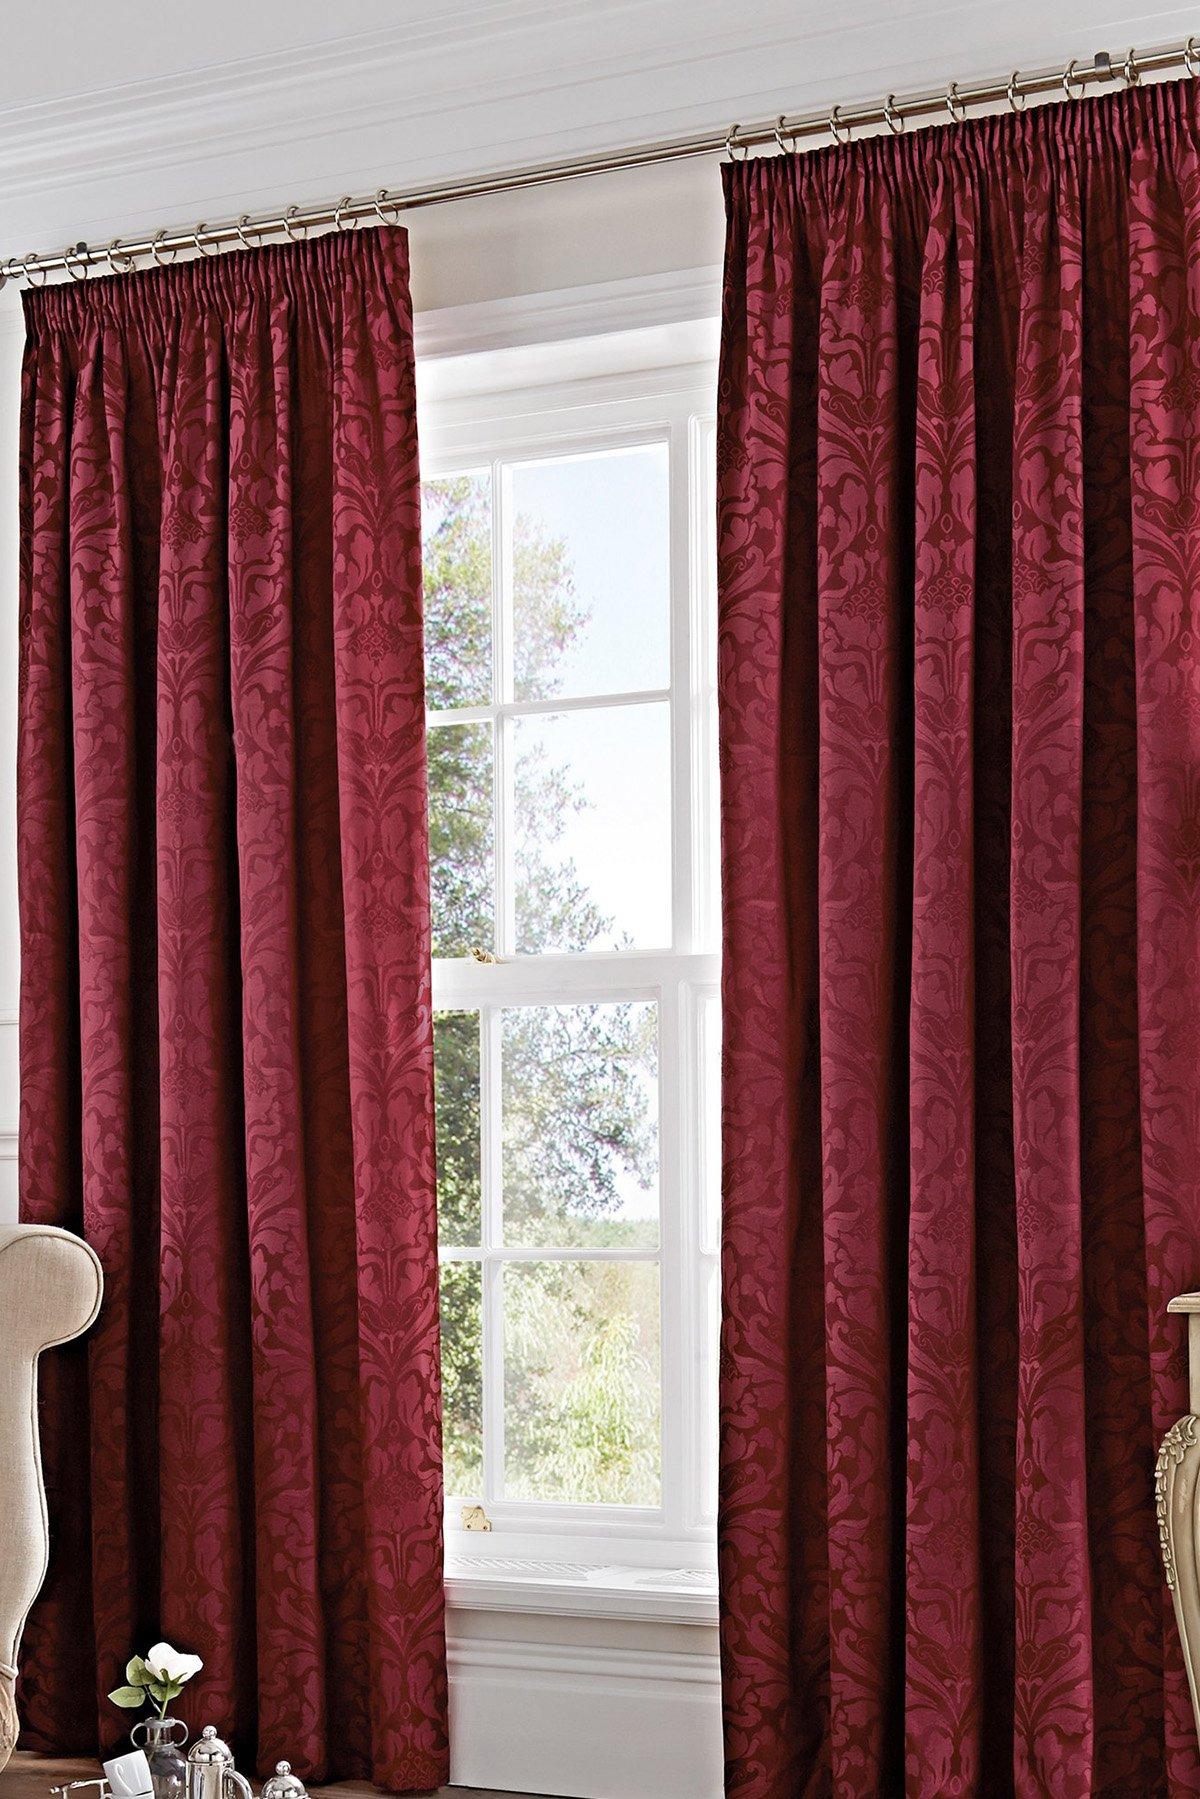 Dreams & Drapes Woven Eastbourne Pencil Pleat Lined Curtains|168x229cm(66x90inches)